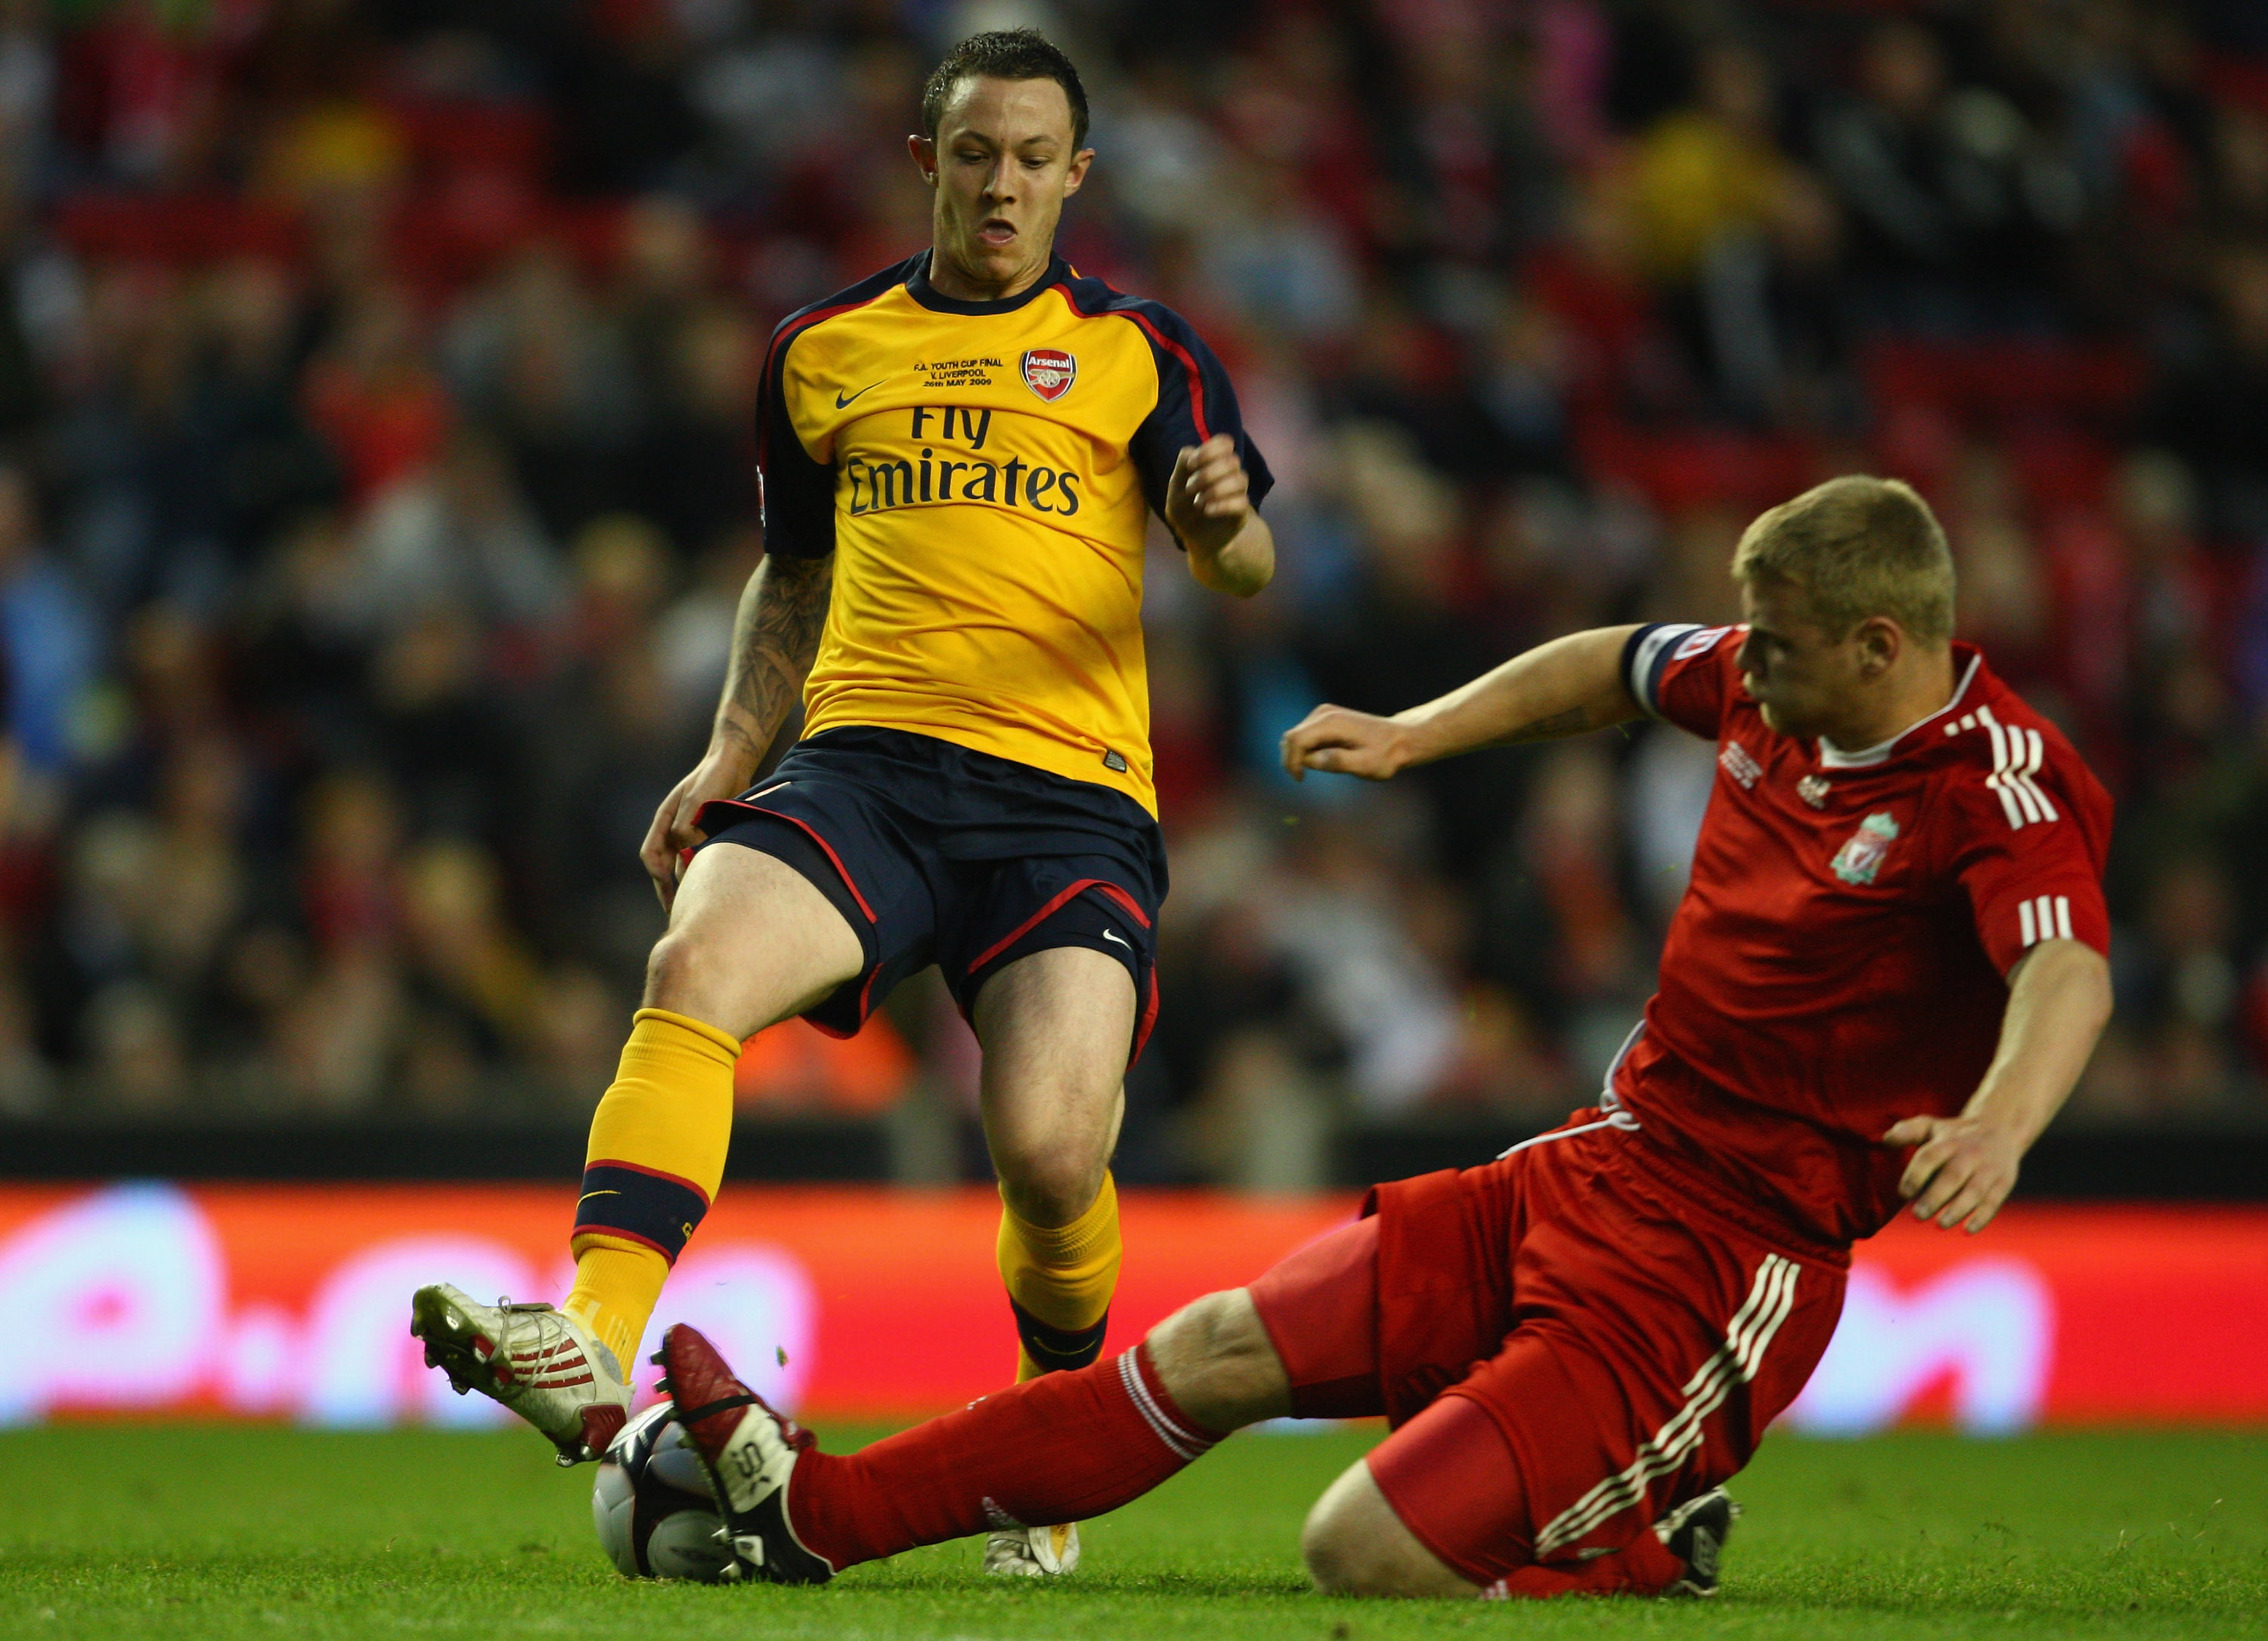 LIVERPOOL, ENGLAND - MAY 26:  Joe Kennedy of Liverpool tackles Rhys Murphy of Arsenal during the second leg of the FA Youth Cup final sponsored by E.ON, between Liverpool and Arsenal at Anfield on May 26, 2009 in Liverpool, England.  (Photo by Jamie McDon